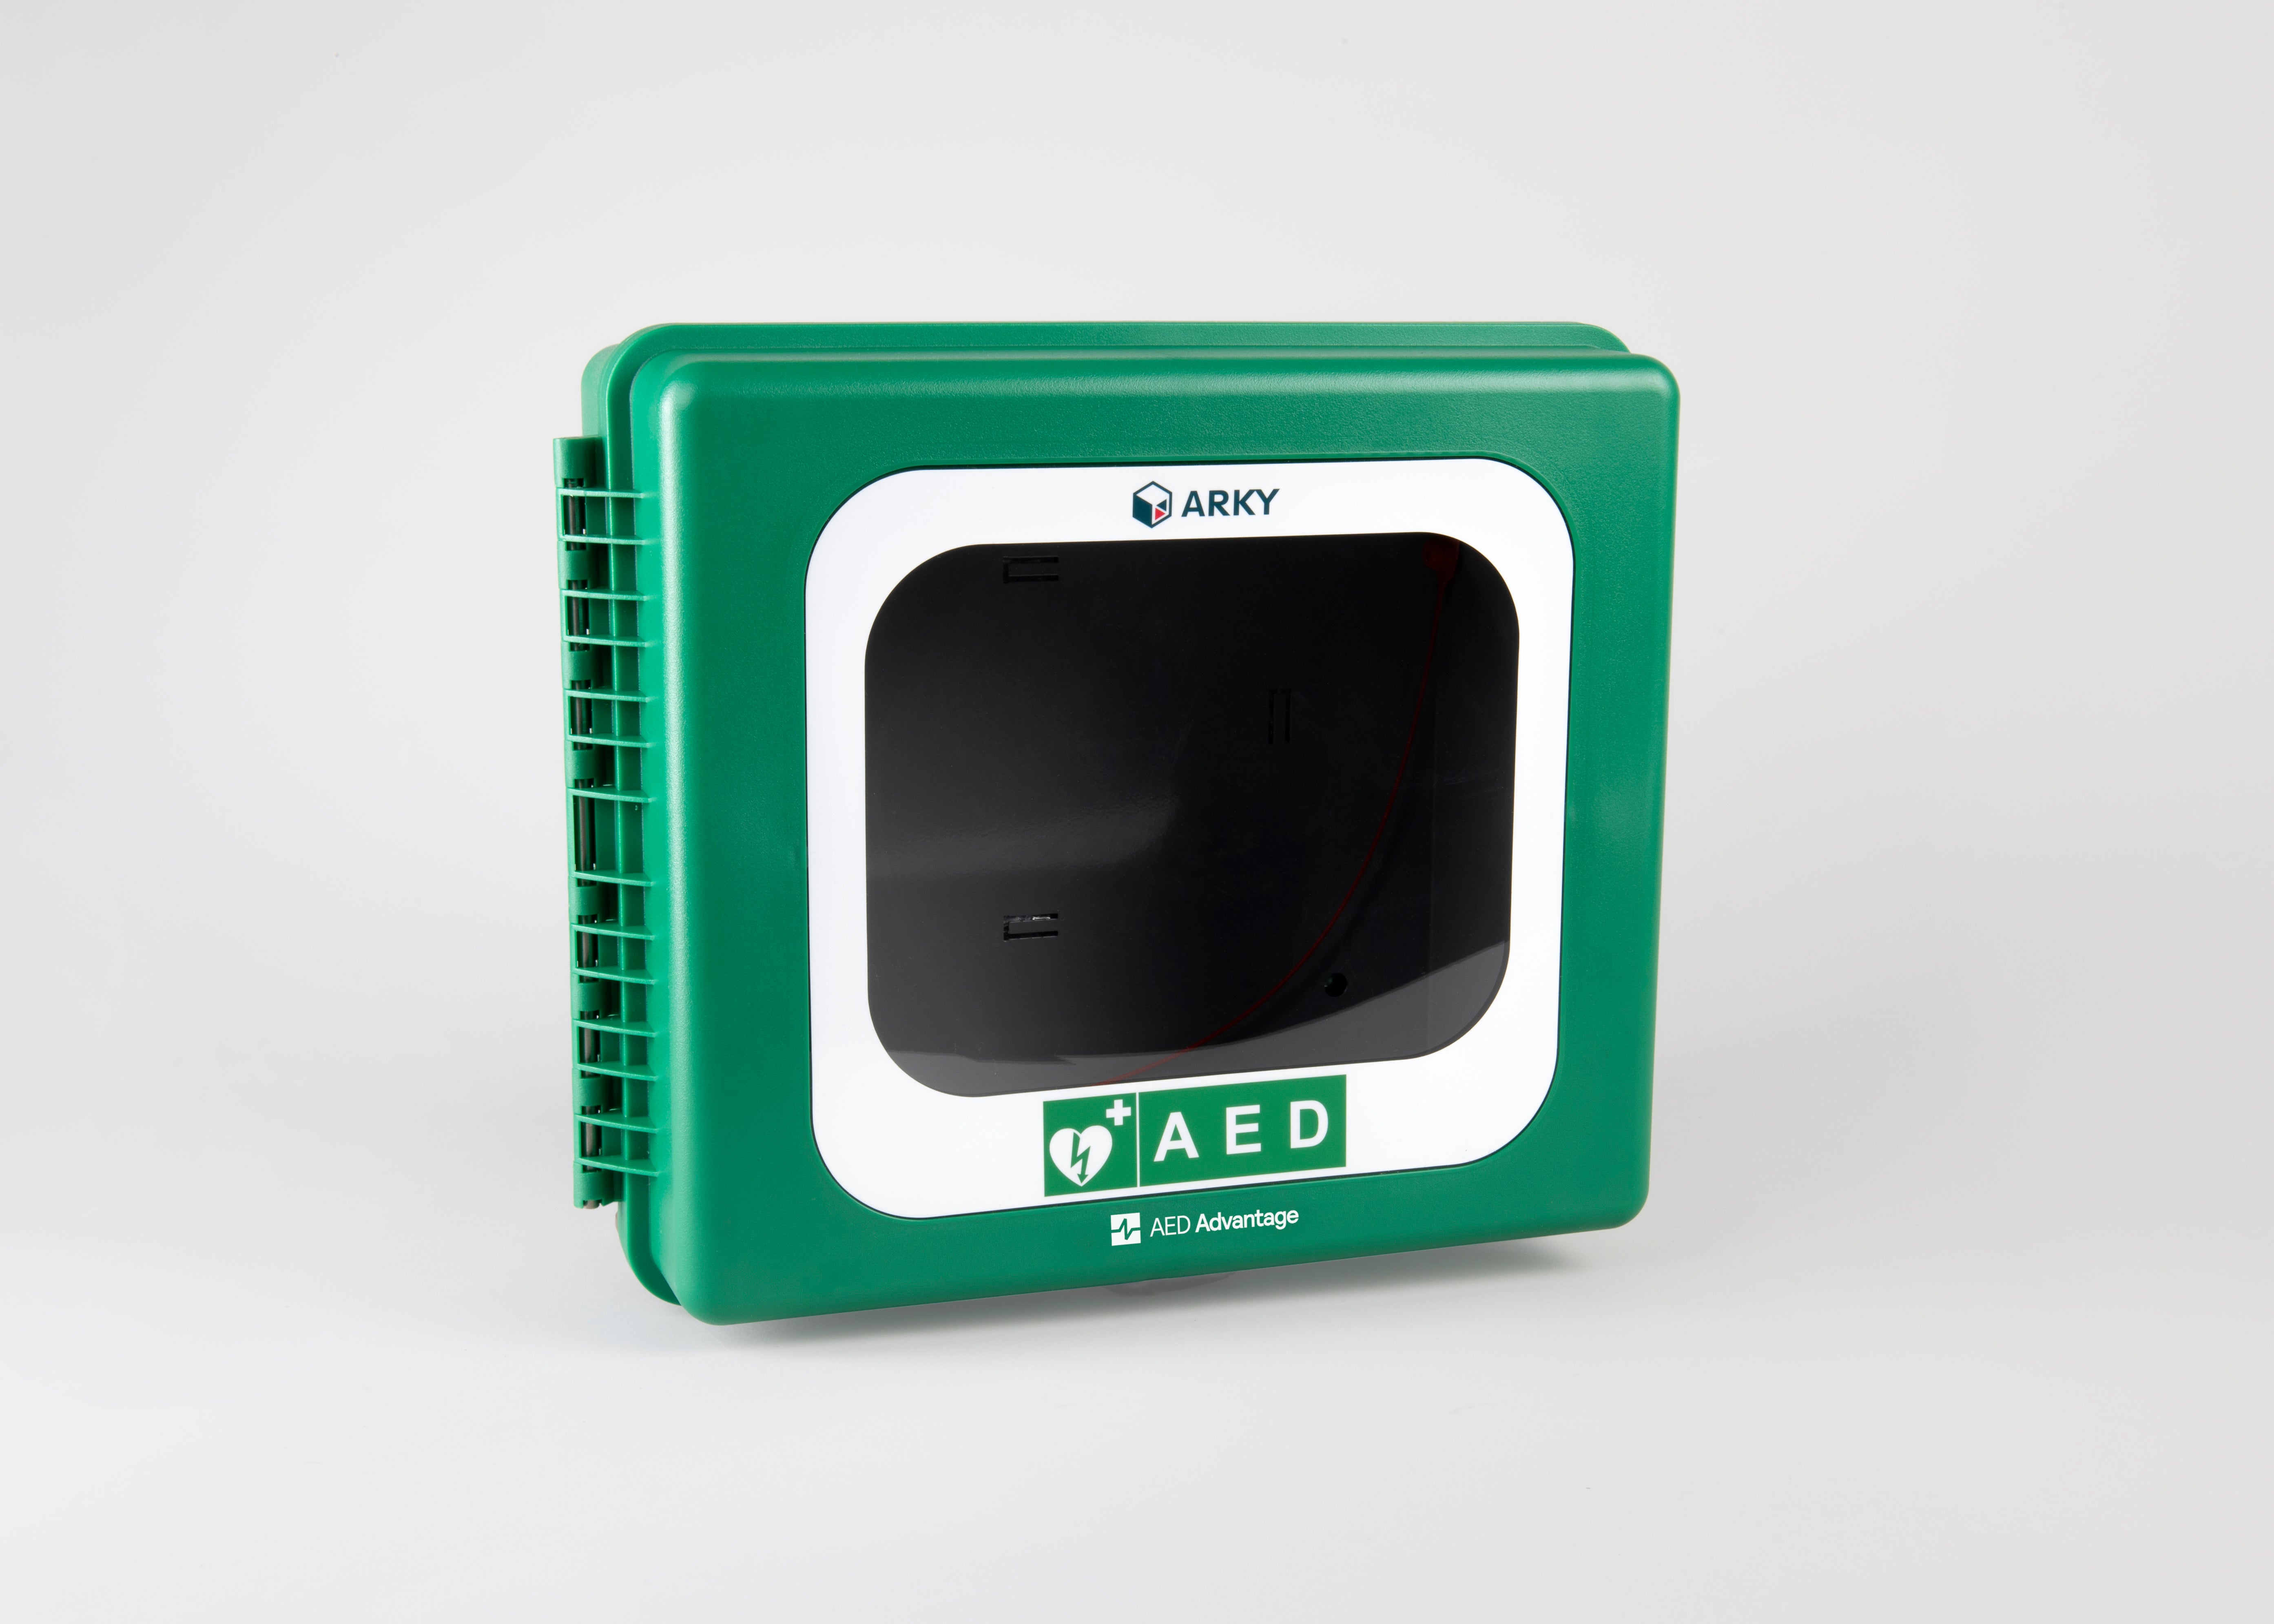 A green and white defibrillator cabinet "AED" written on the front in bold clear text